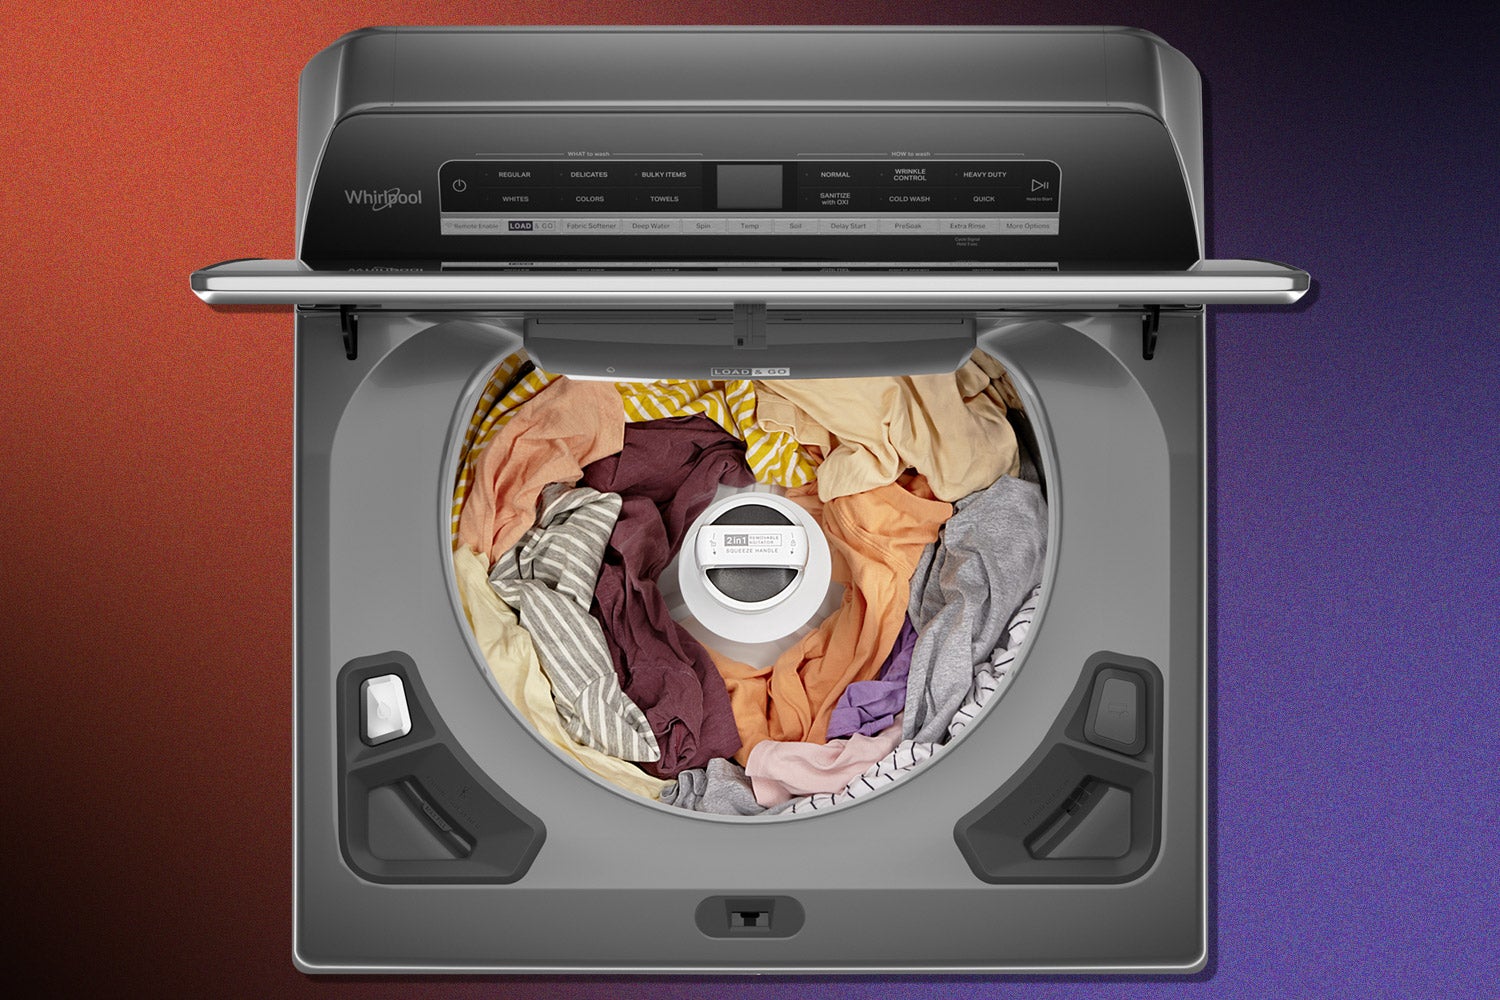 A Whirlpool top-loading washer with a removable agitator, with the agitator in place and full of clothes.